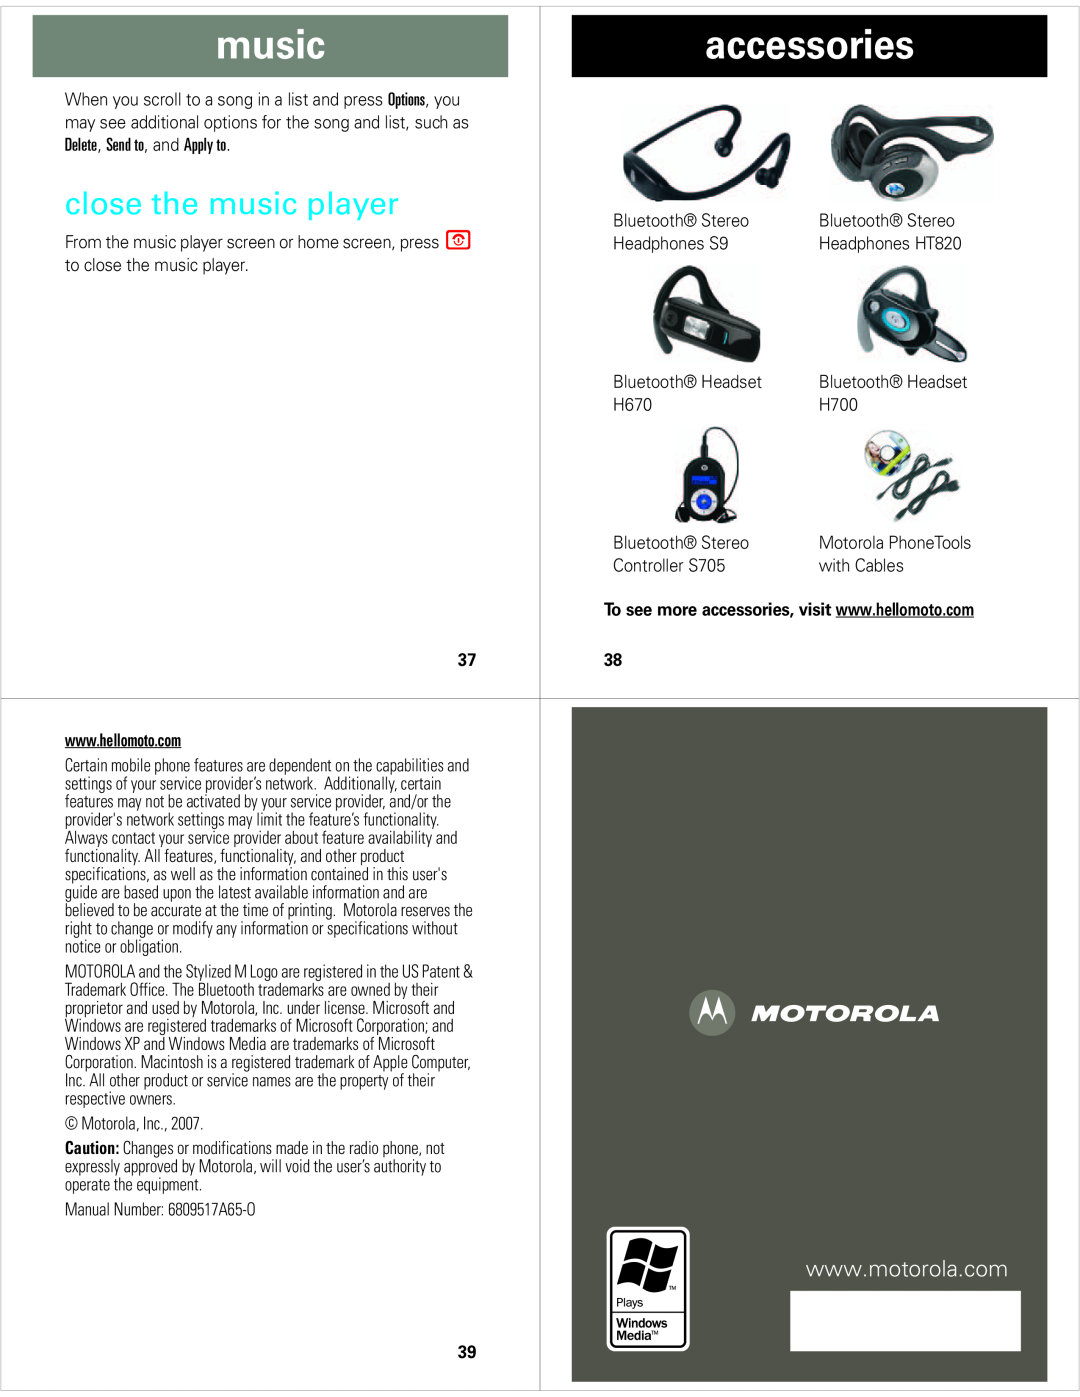 Motorola V8 manual accessories, close the music player, may see additional options for the song and list, such as 